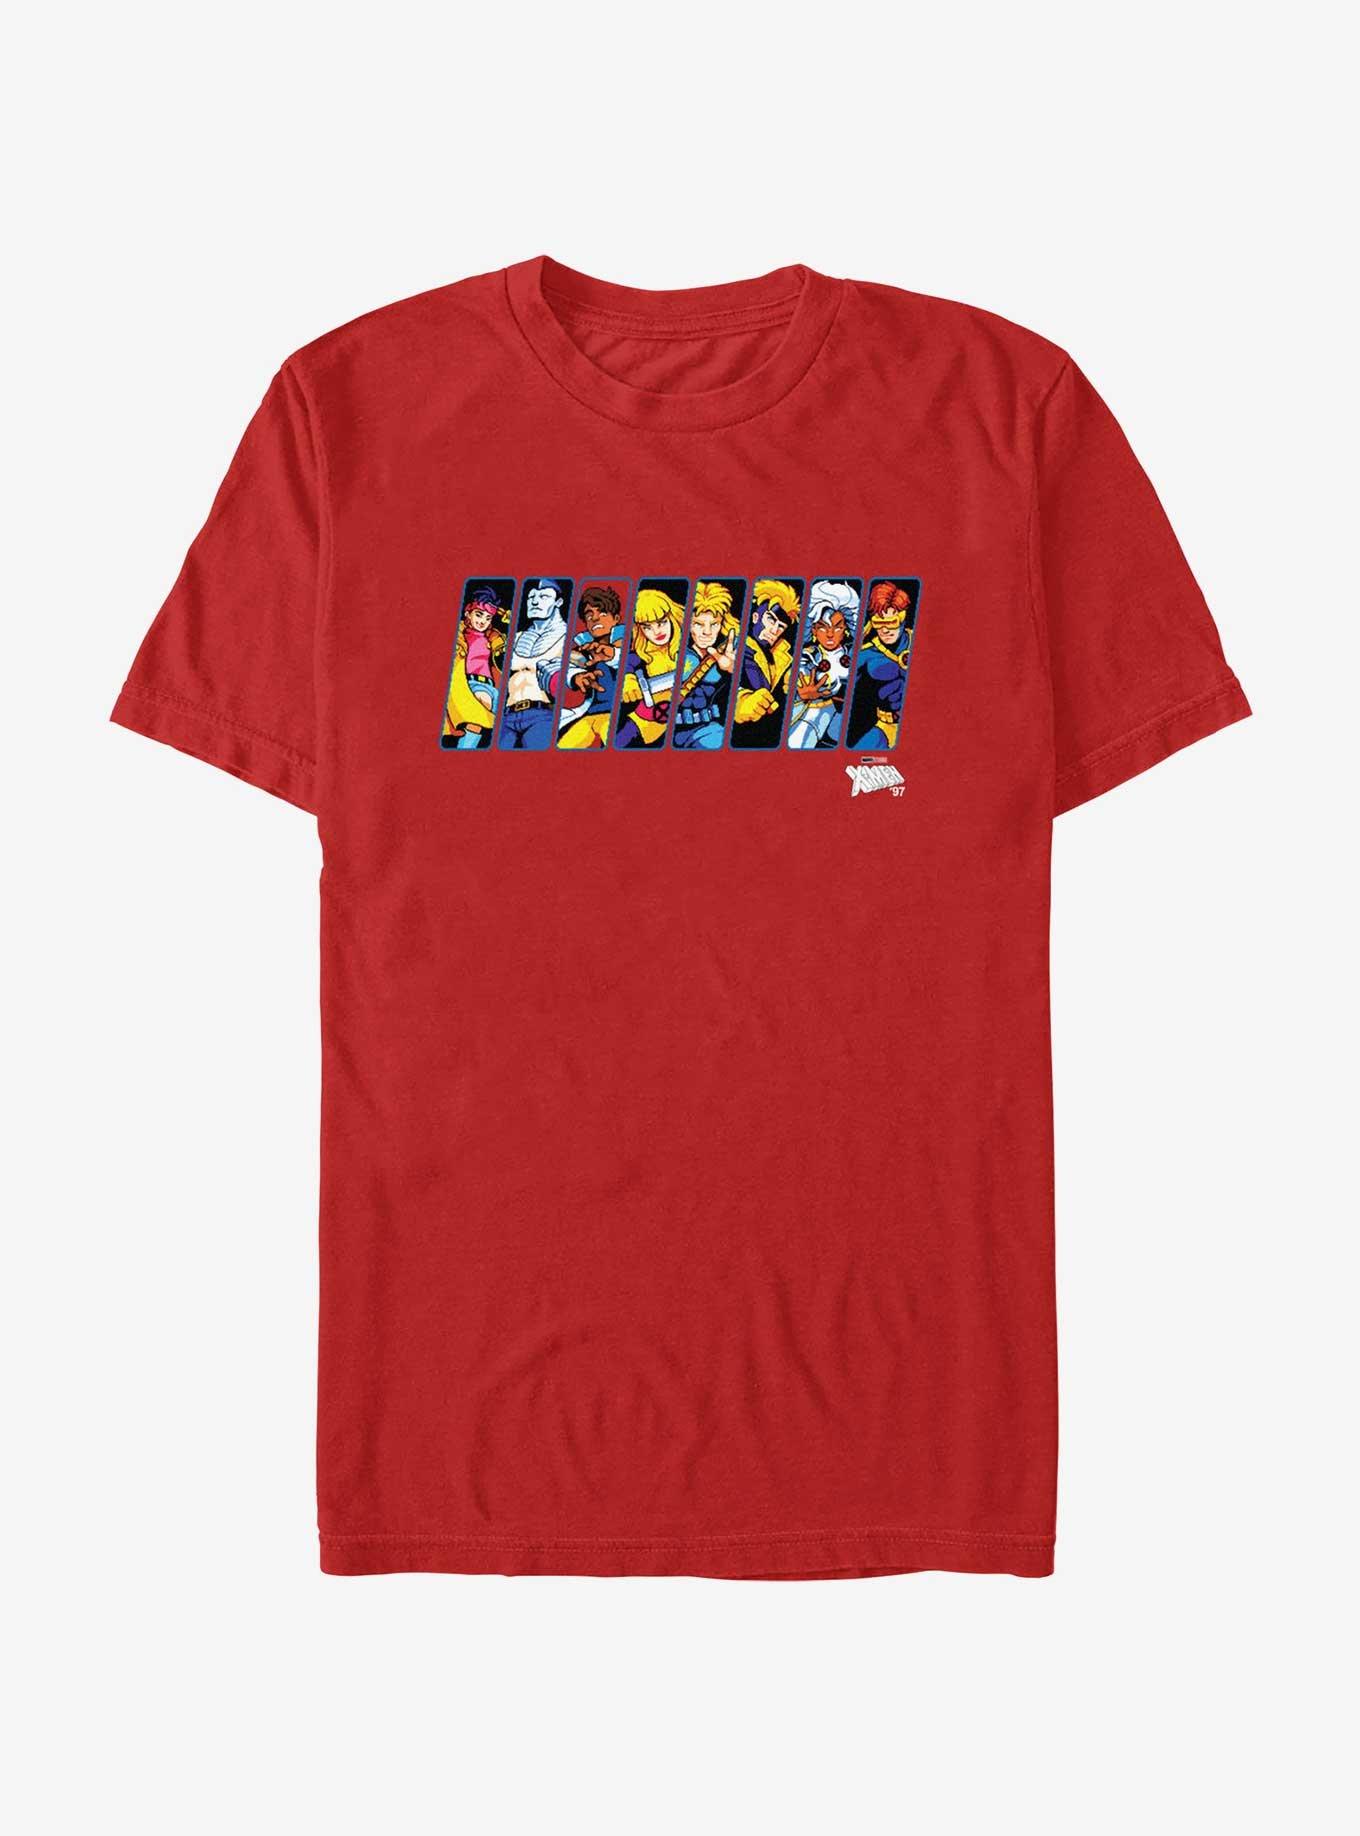 X-Men '97 Select Your Player T-Shirt, RED, hi-res